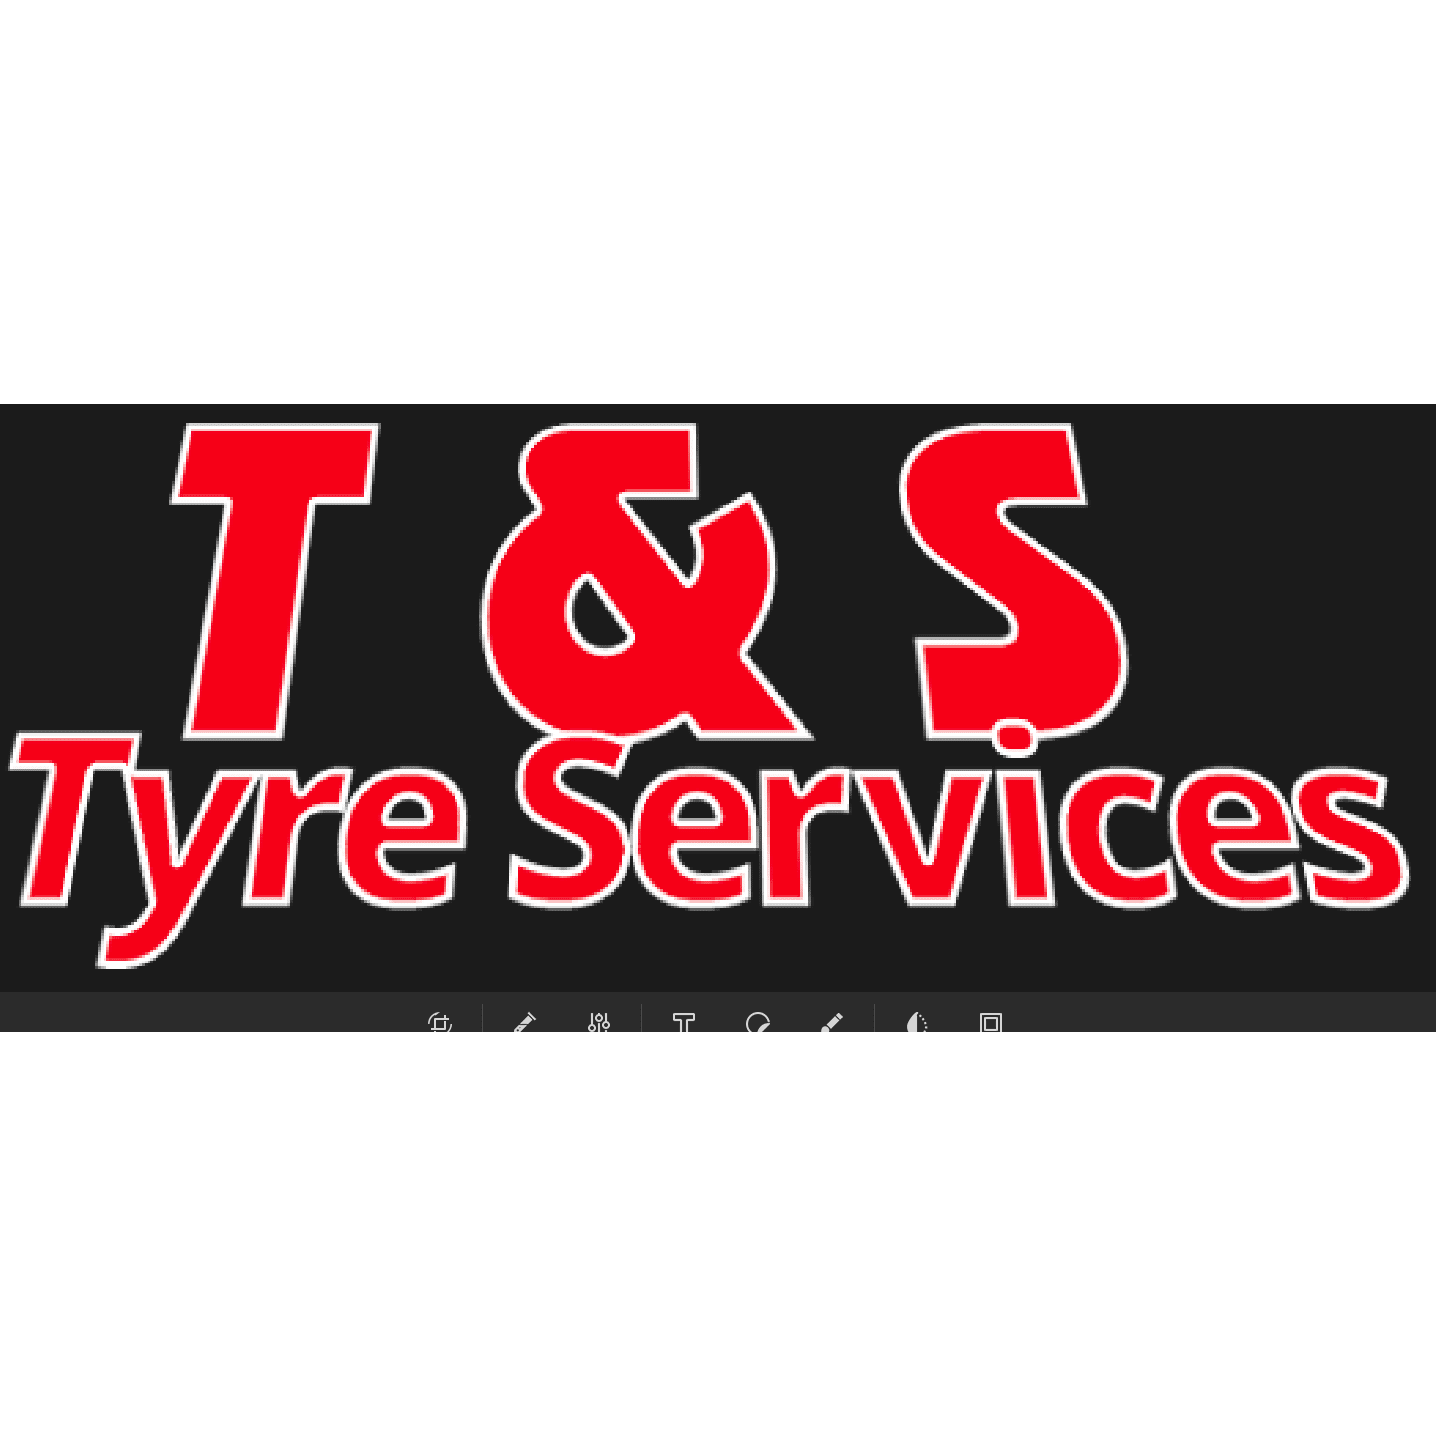 LOGO T & S Tyre Services Walsall 01922 745096